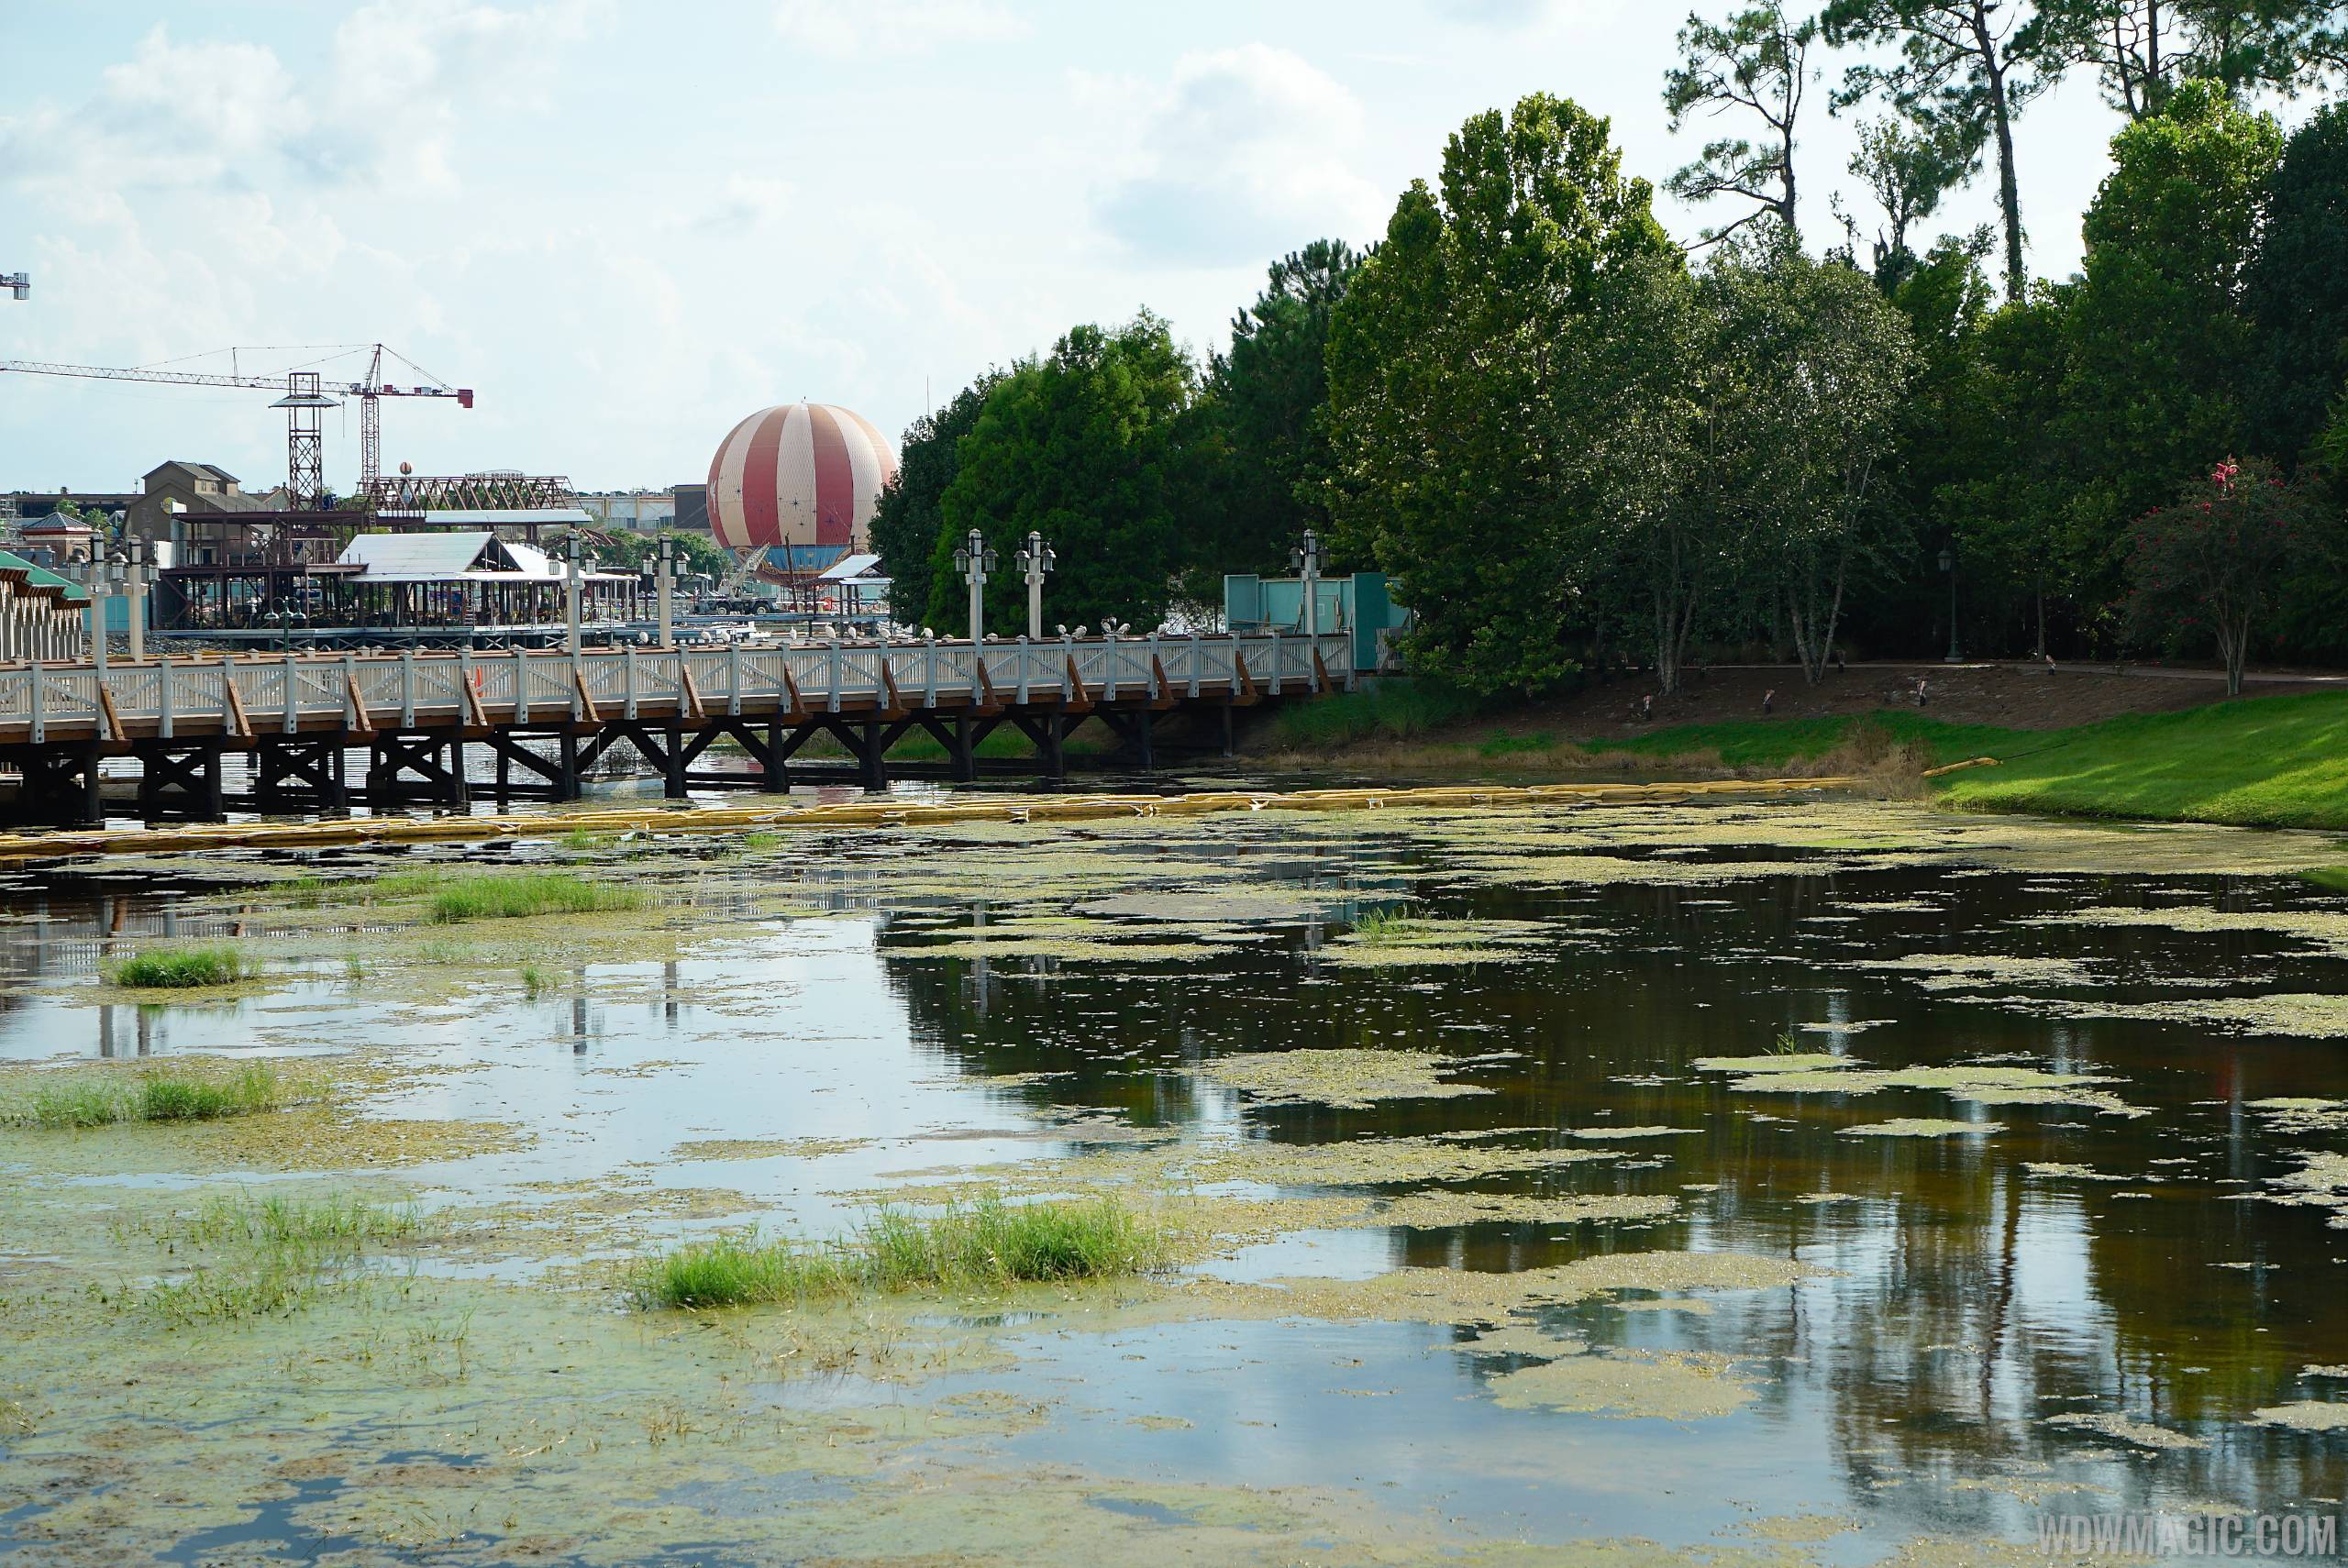 PHOTOS - New Disney Springs Marketplace boat dock and bridge to Saratoga Springs nears completion